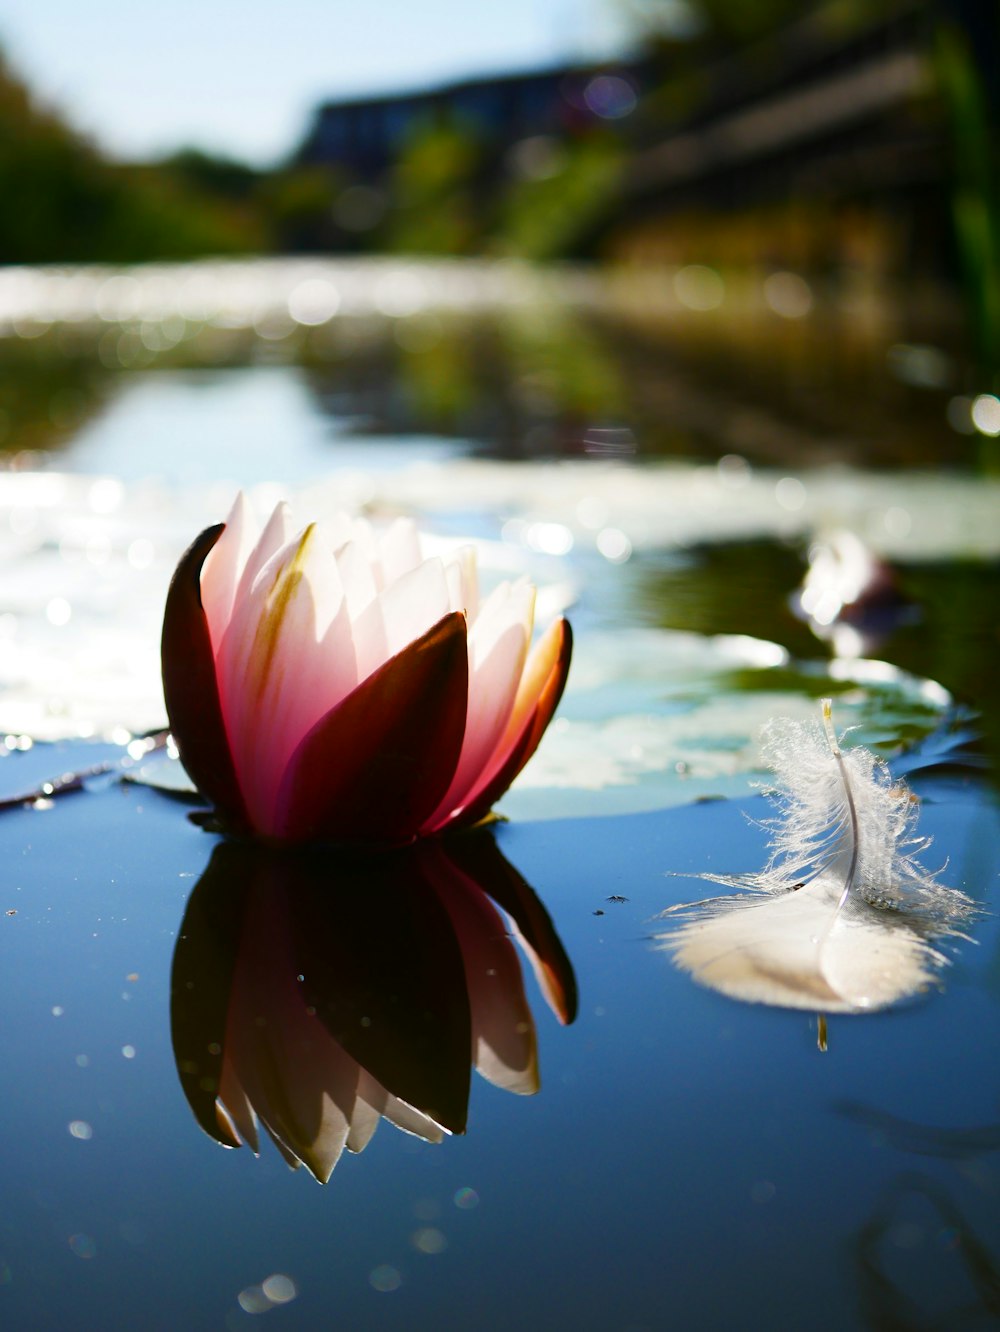 white and pink lotus flower on water